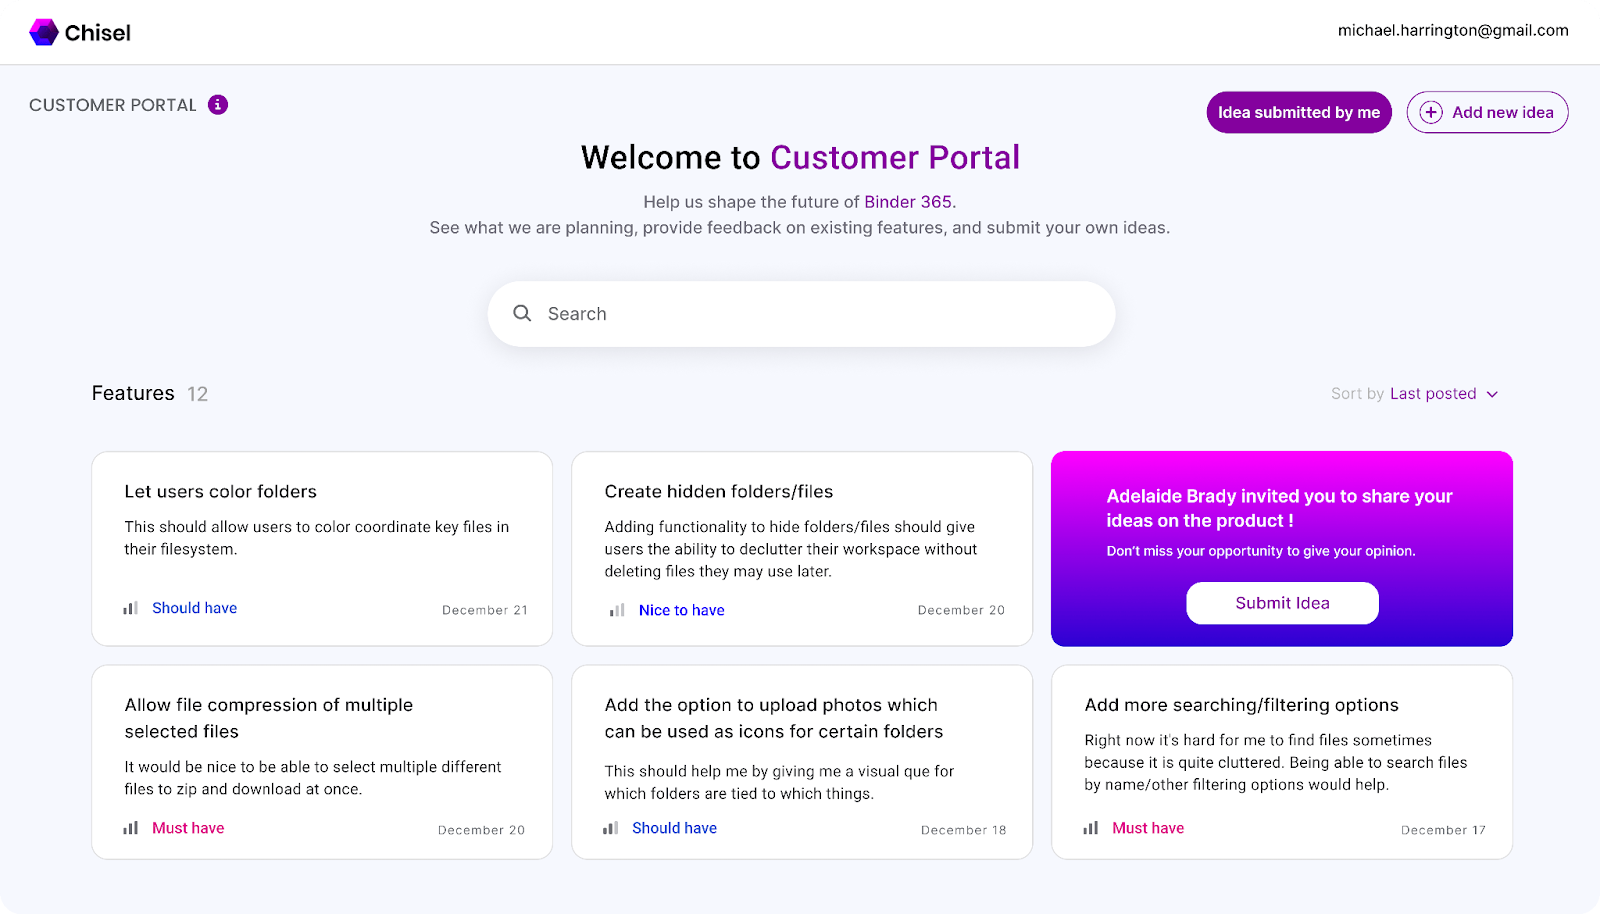 Chisel's feedback portal empowers customers to share, store, and prioritize their ideas effortlessly.